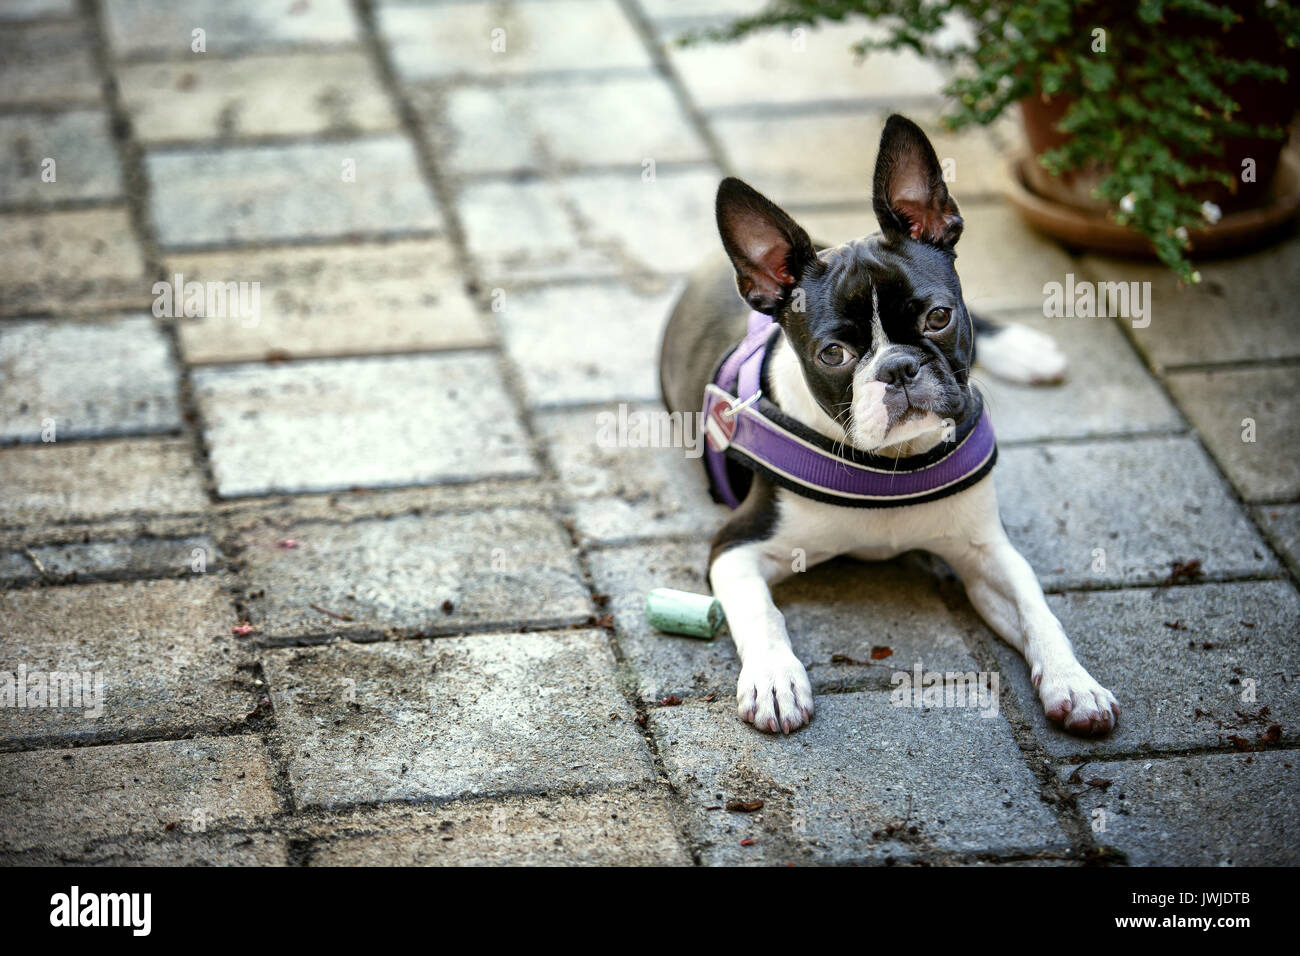 Outdoor portrait of a young Boston Terrier on a sunny summer day Stock Photo